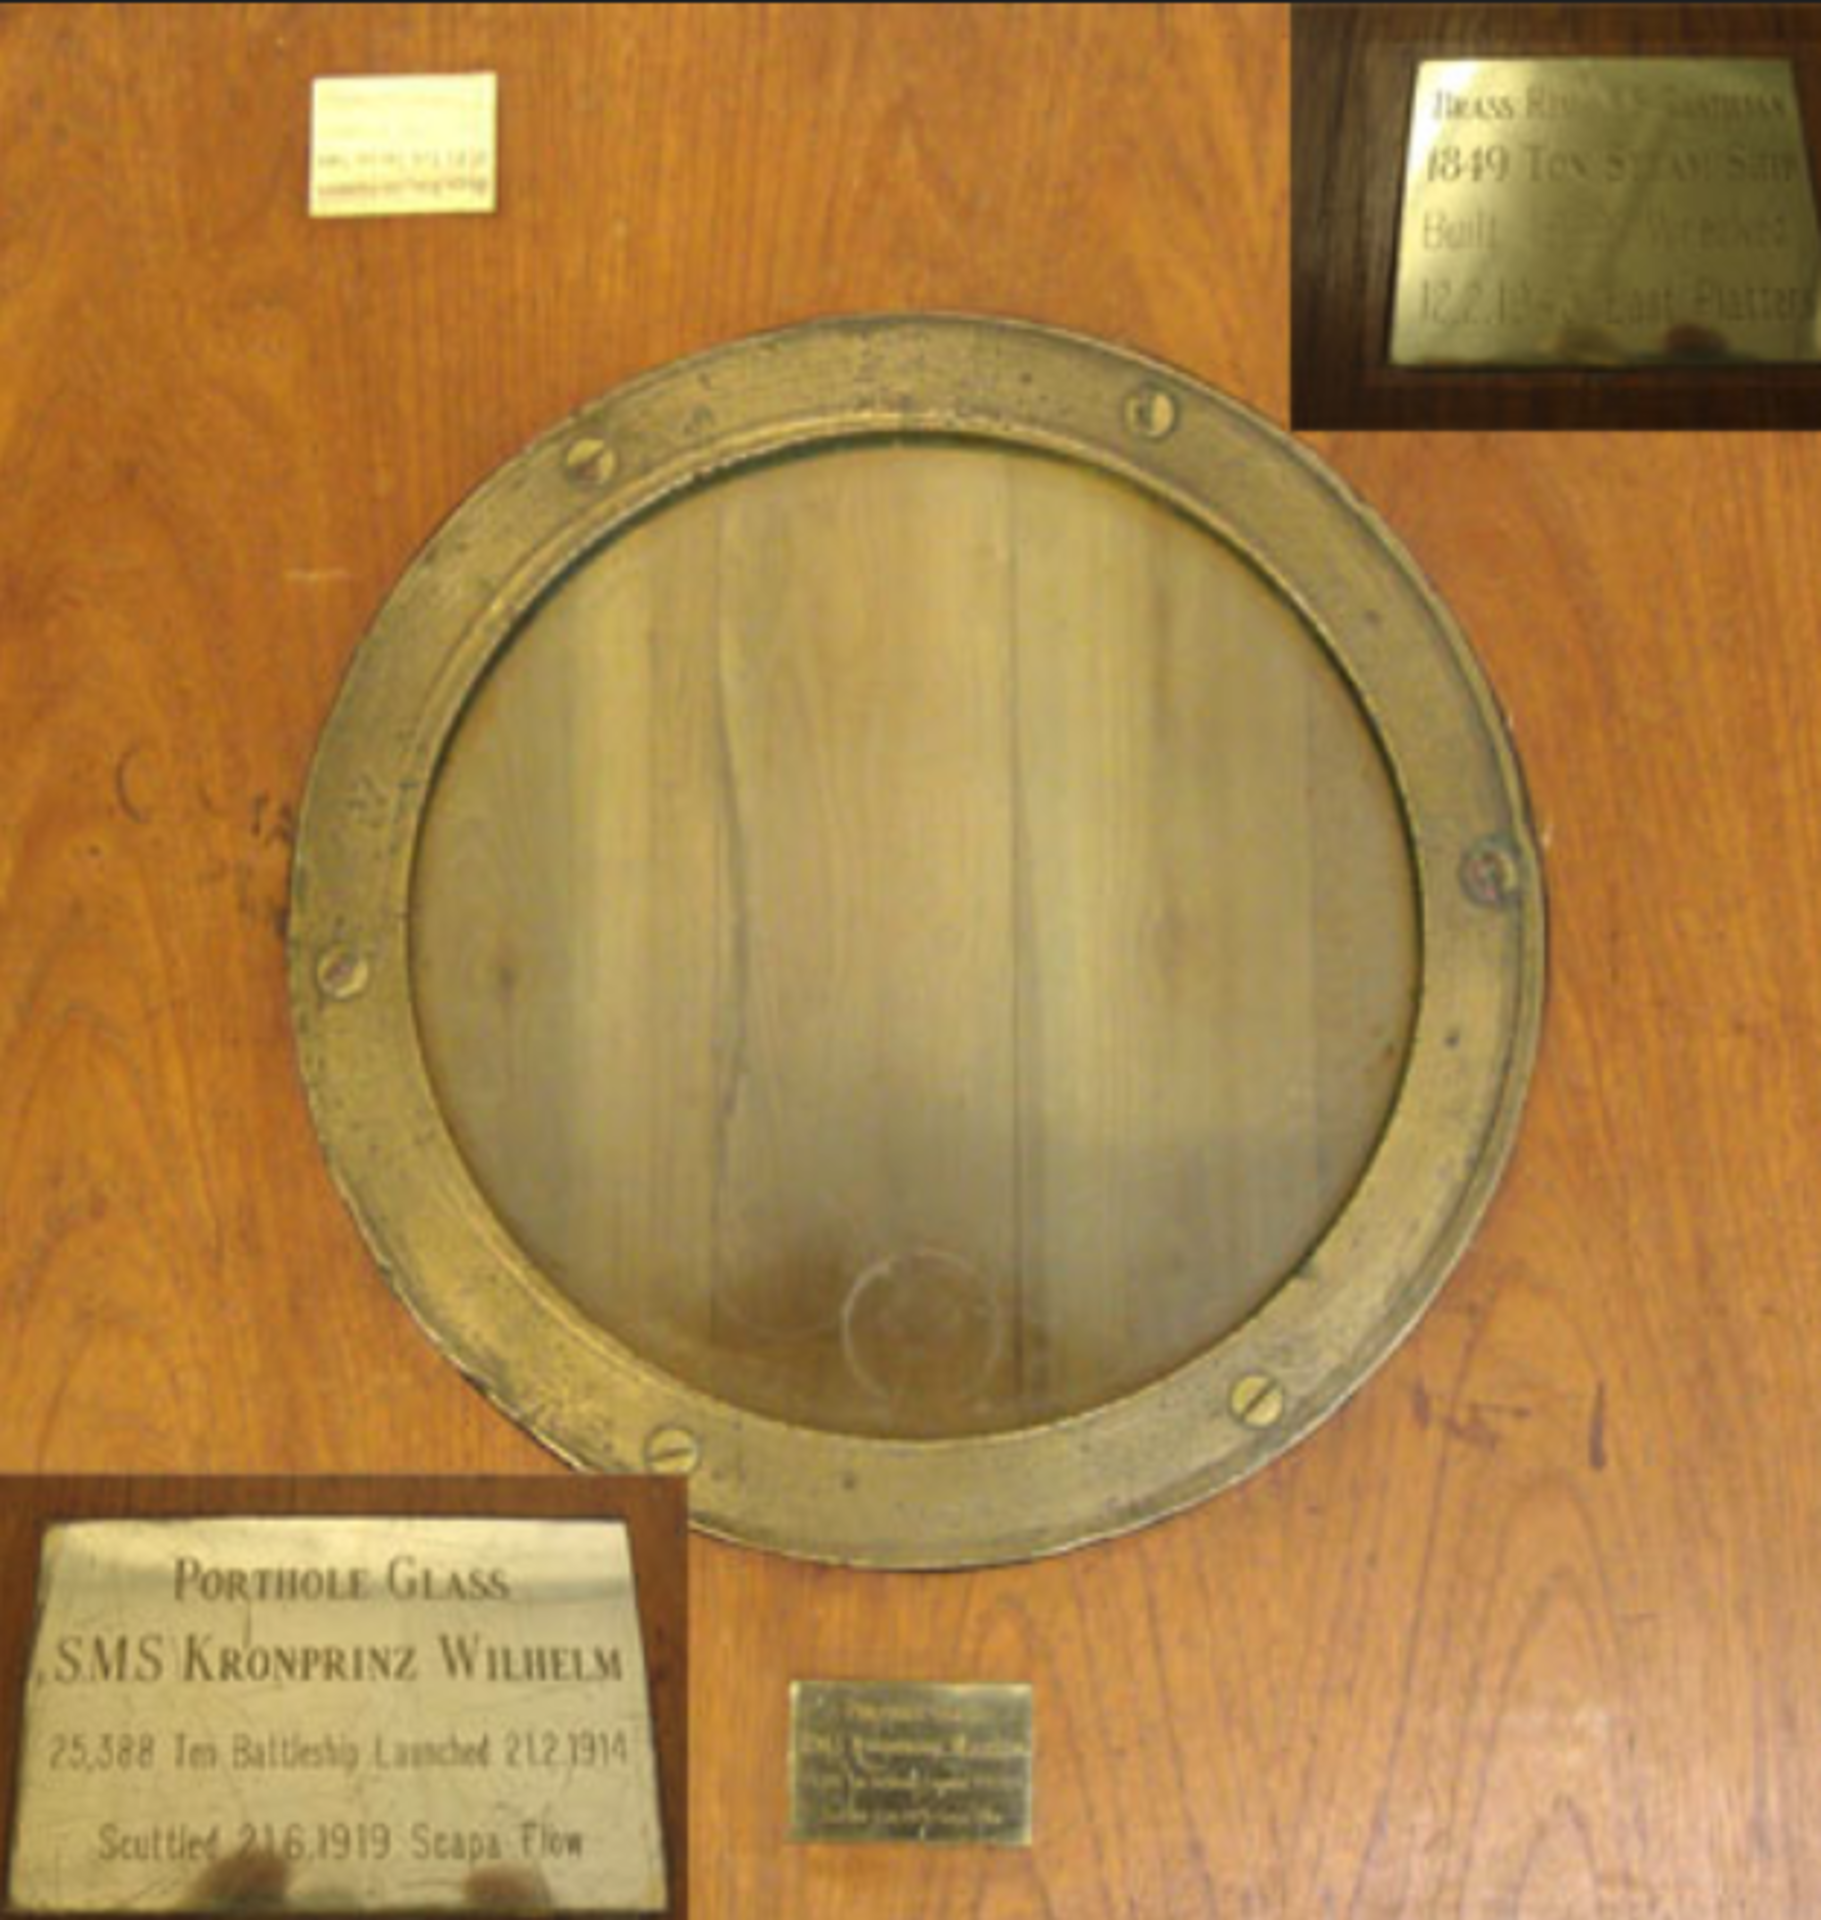 SS Catilian Porthole Rim Recovered From Scapa Flow With Porthole Glass From SMS Kronprinz Wilhelm - Image 3 of 3